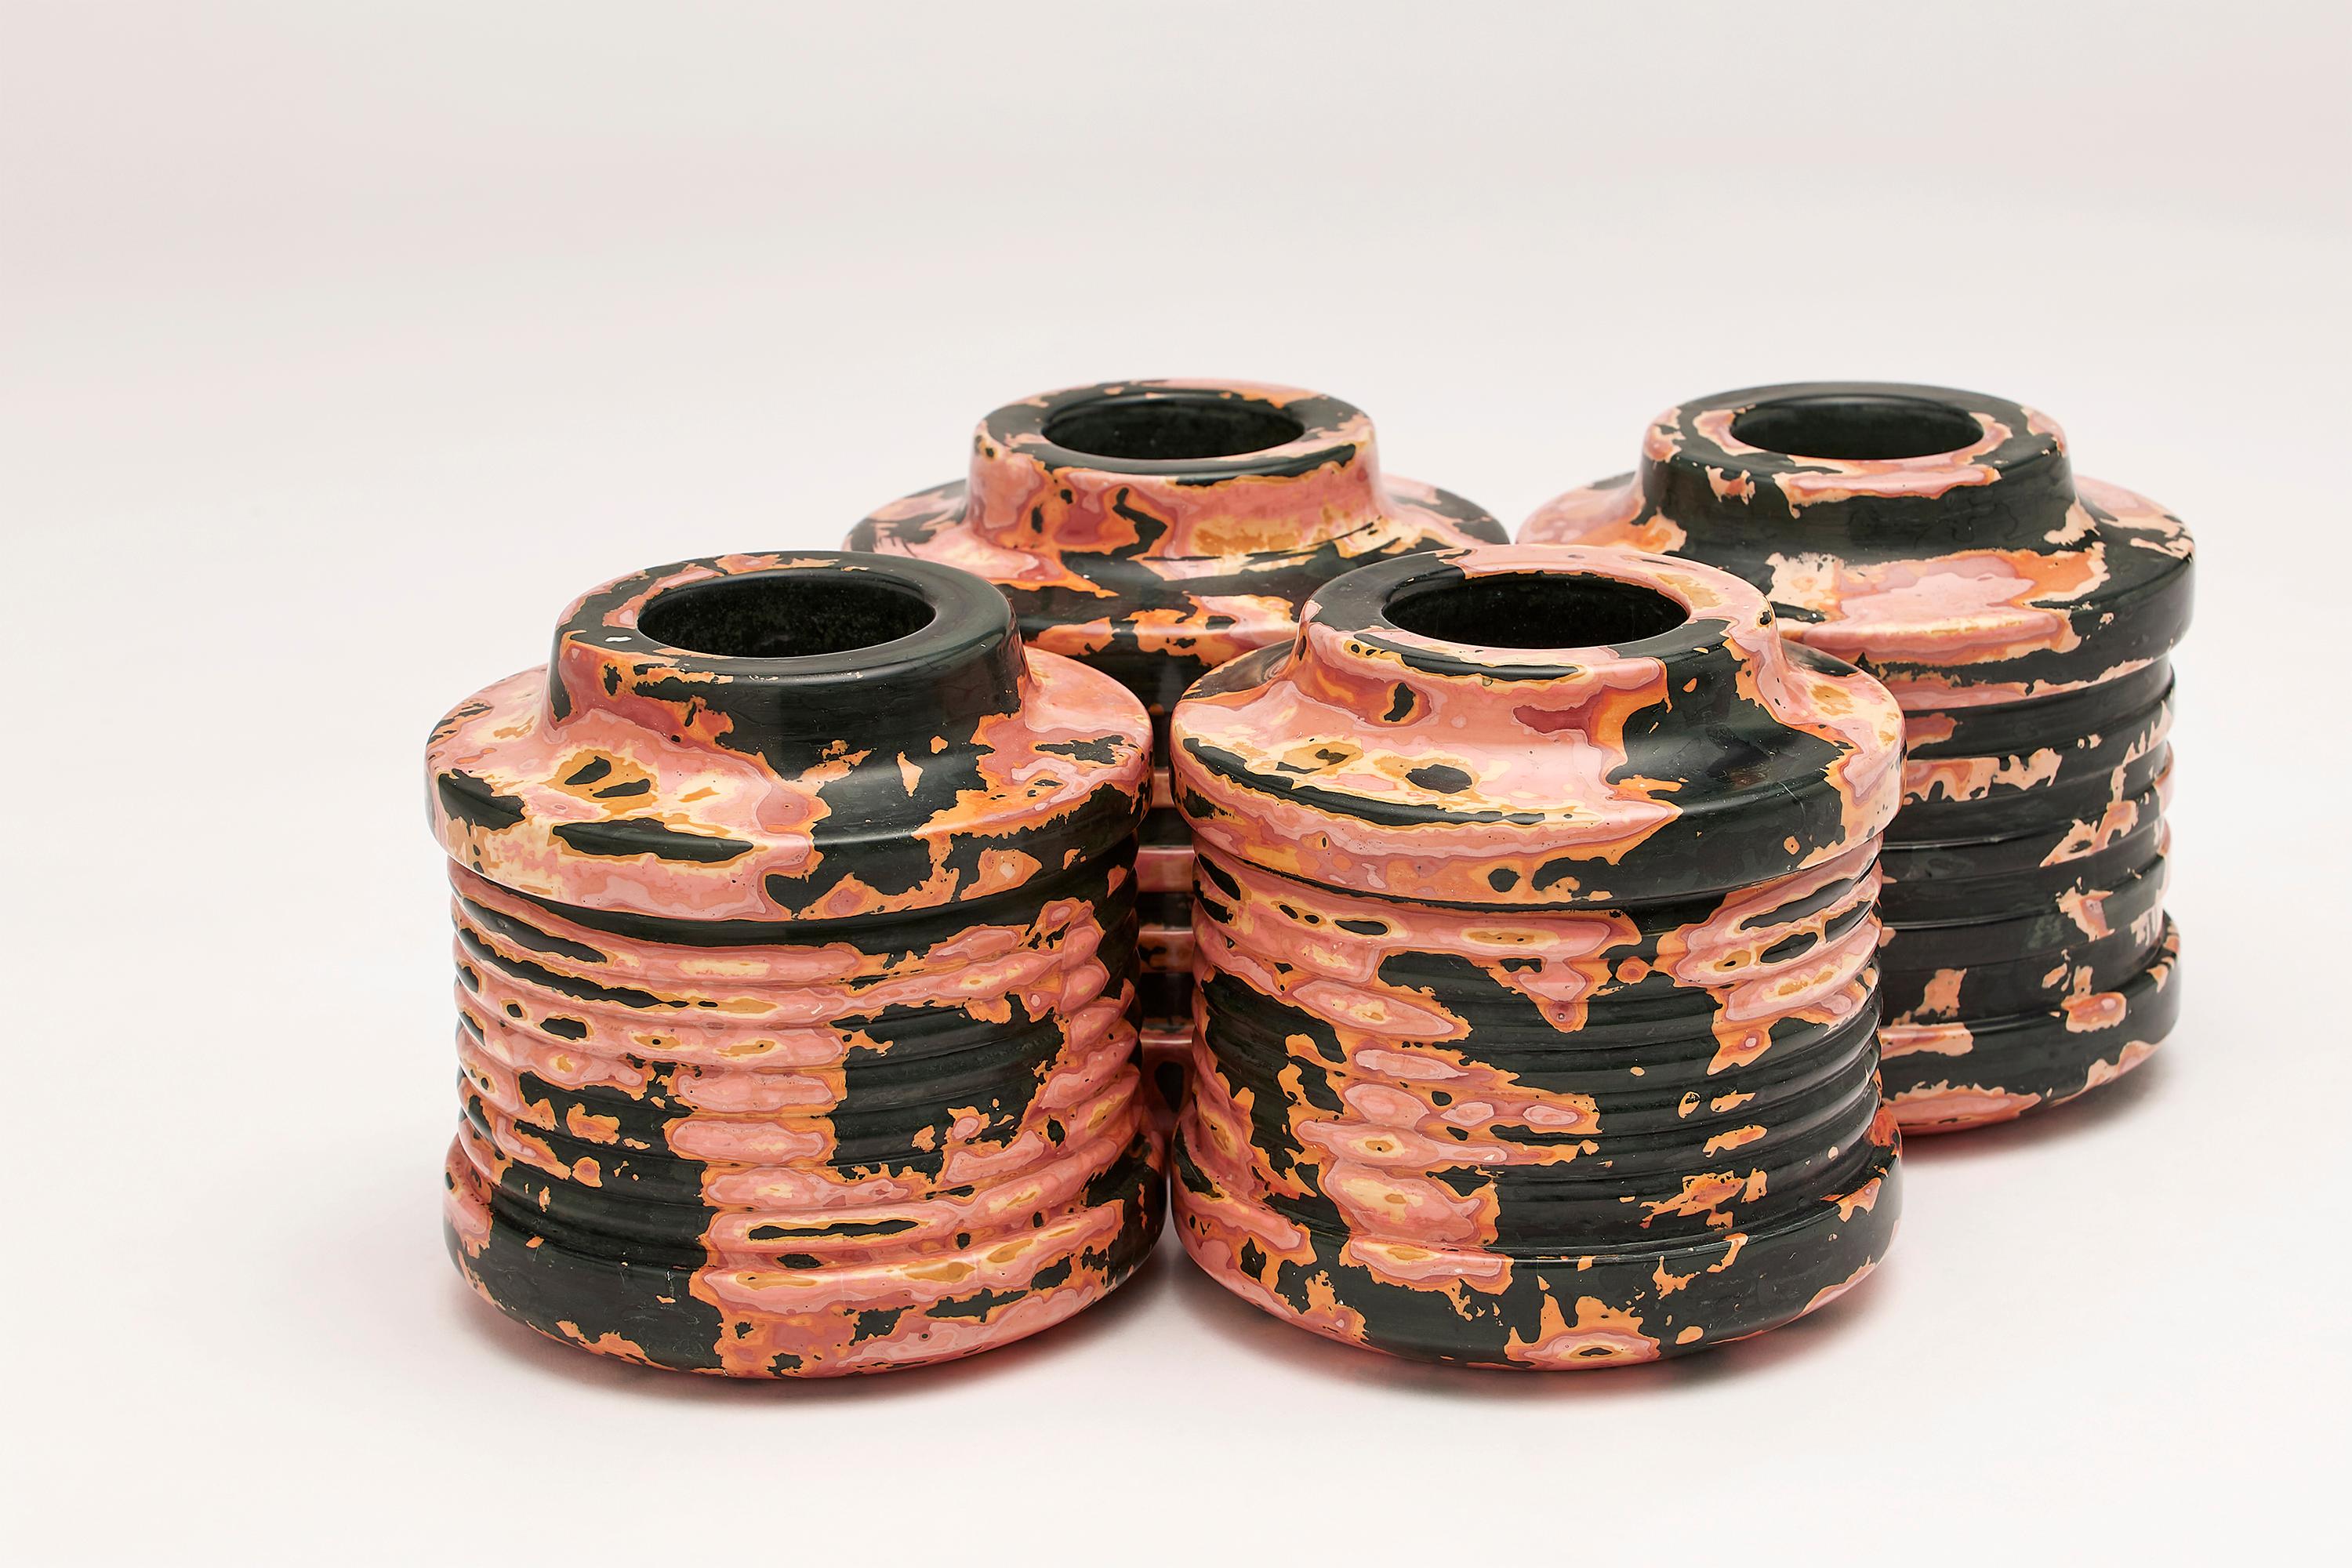 Acrylic Coral Stone, Pair of Vases / Vessels in Pink, Orange & Green by Nic Parnell For Sale